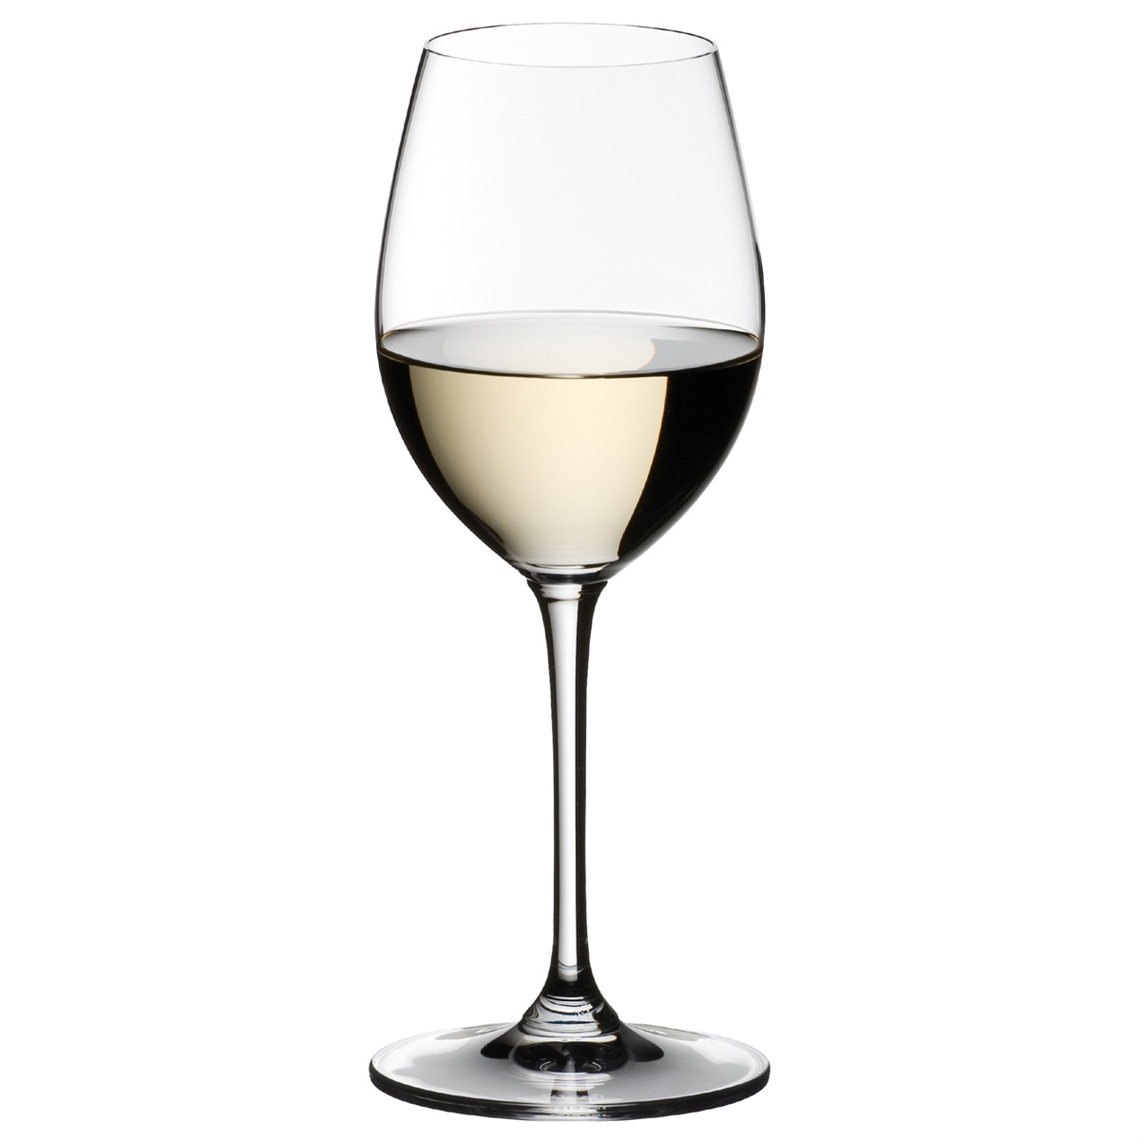 View more glass and co from our Dessert Wine Glasses range